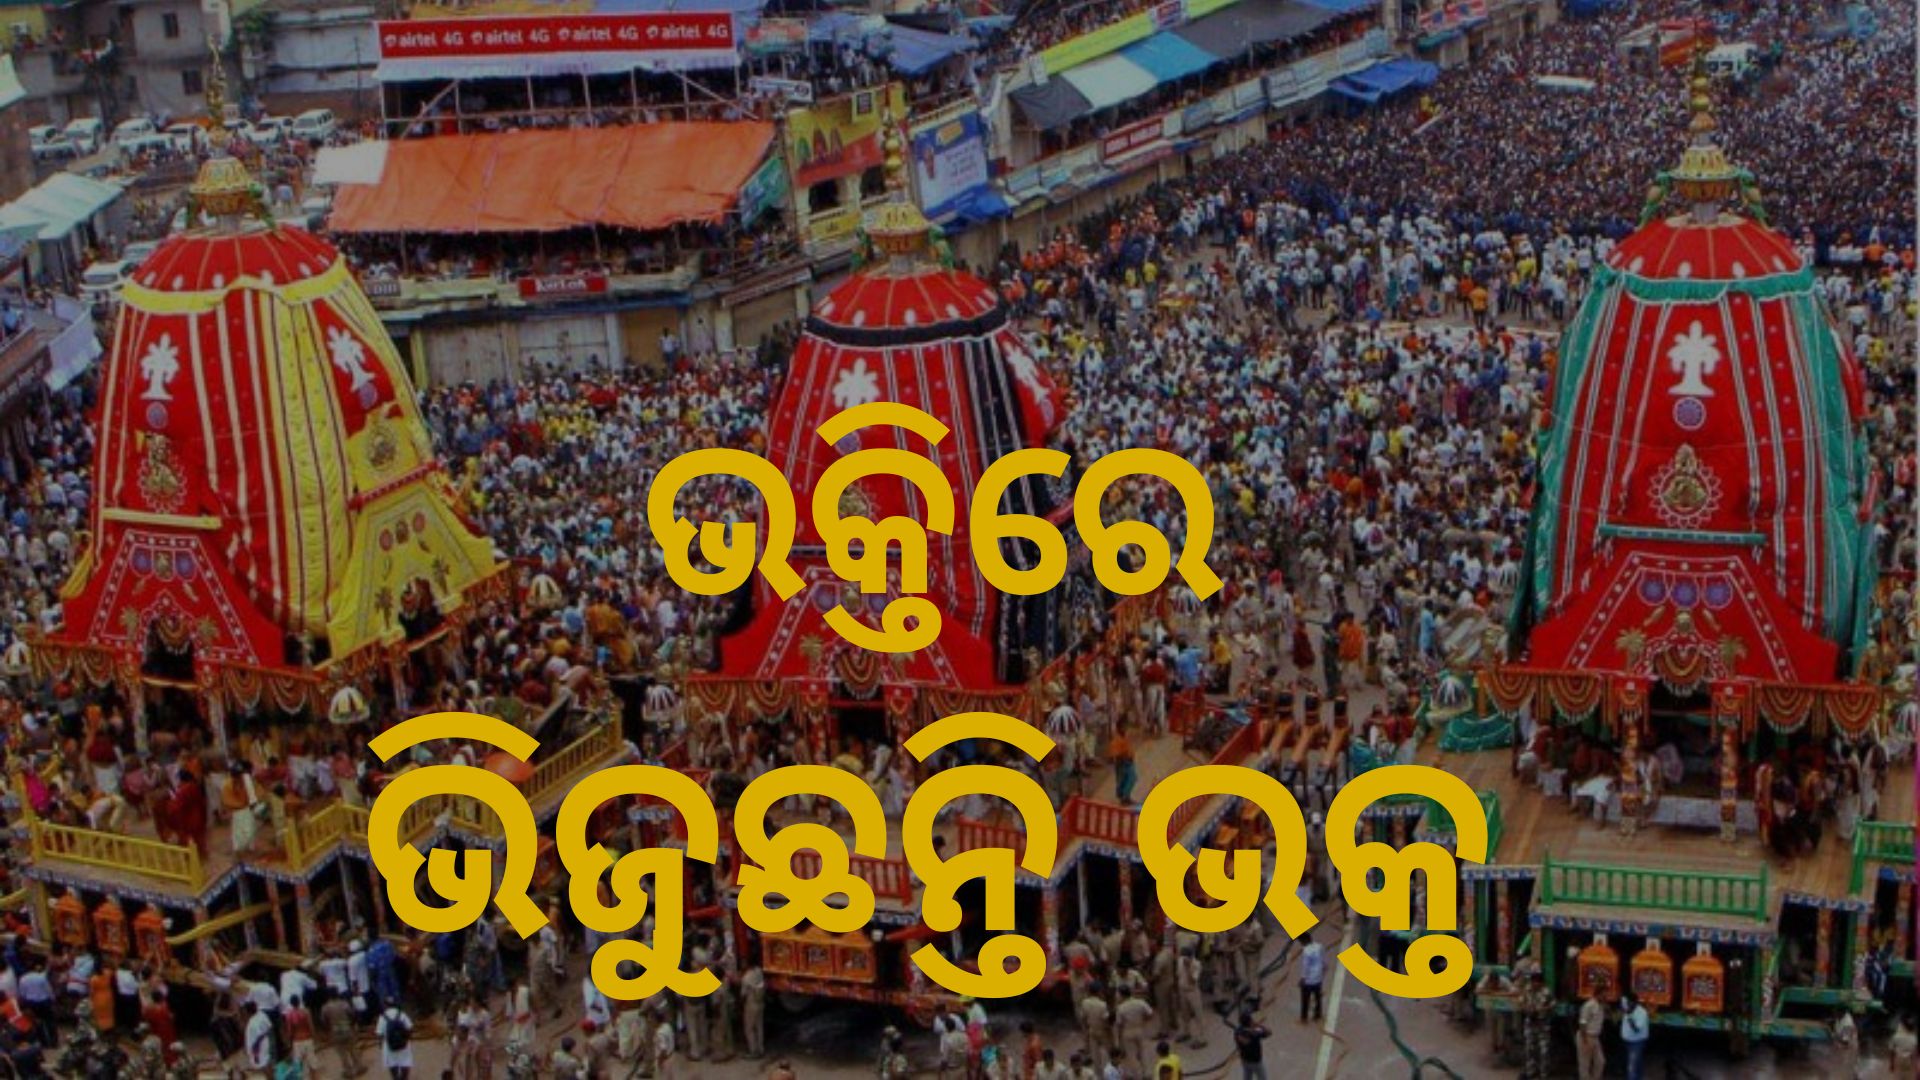 Today is world famous rathayatra2022